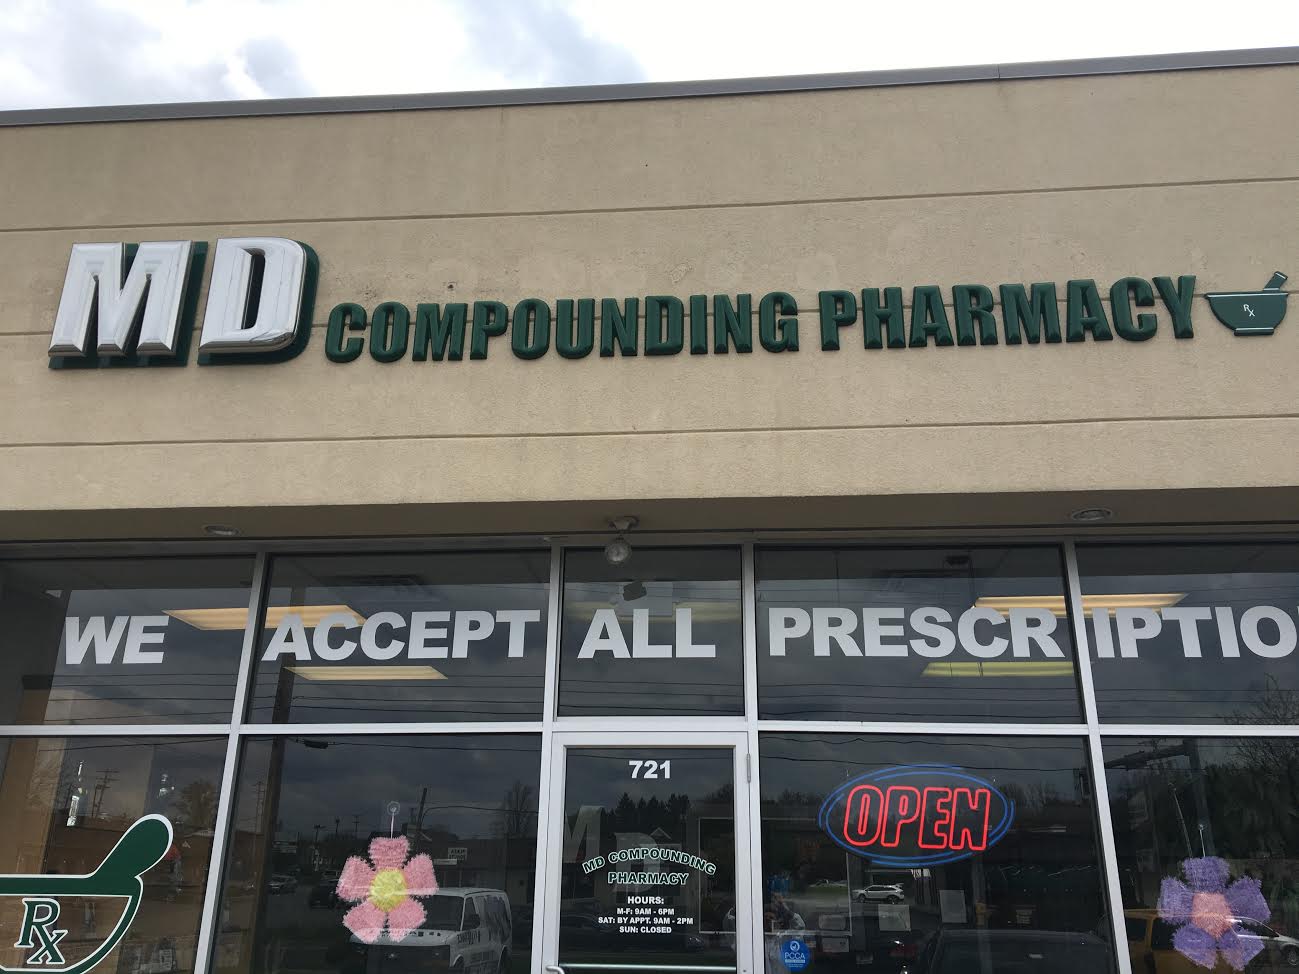 MD COMPOUNDING PHARMACY